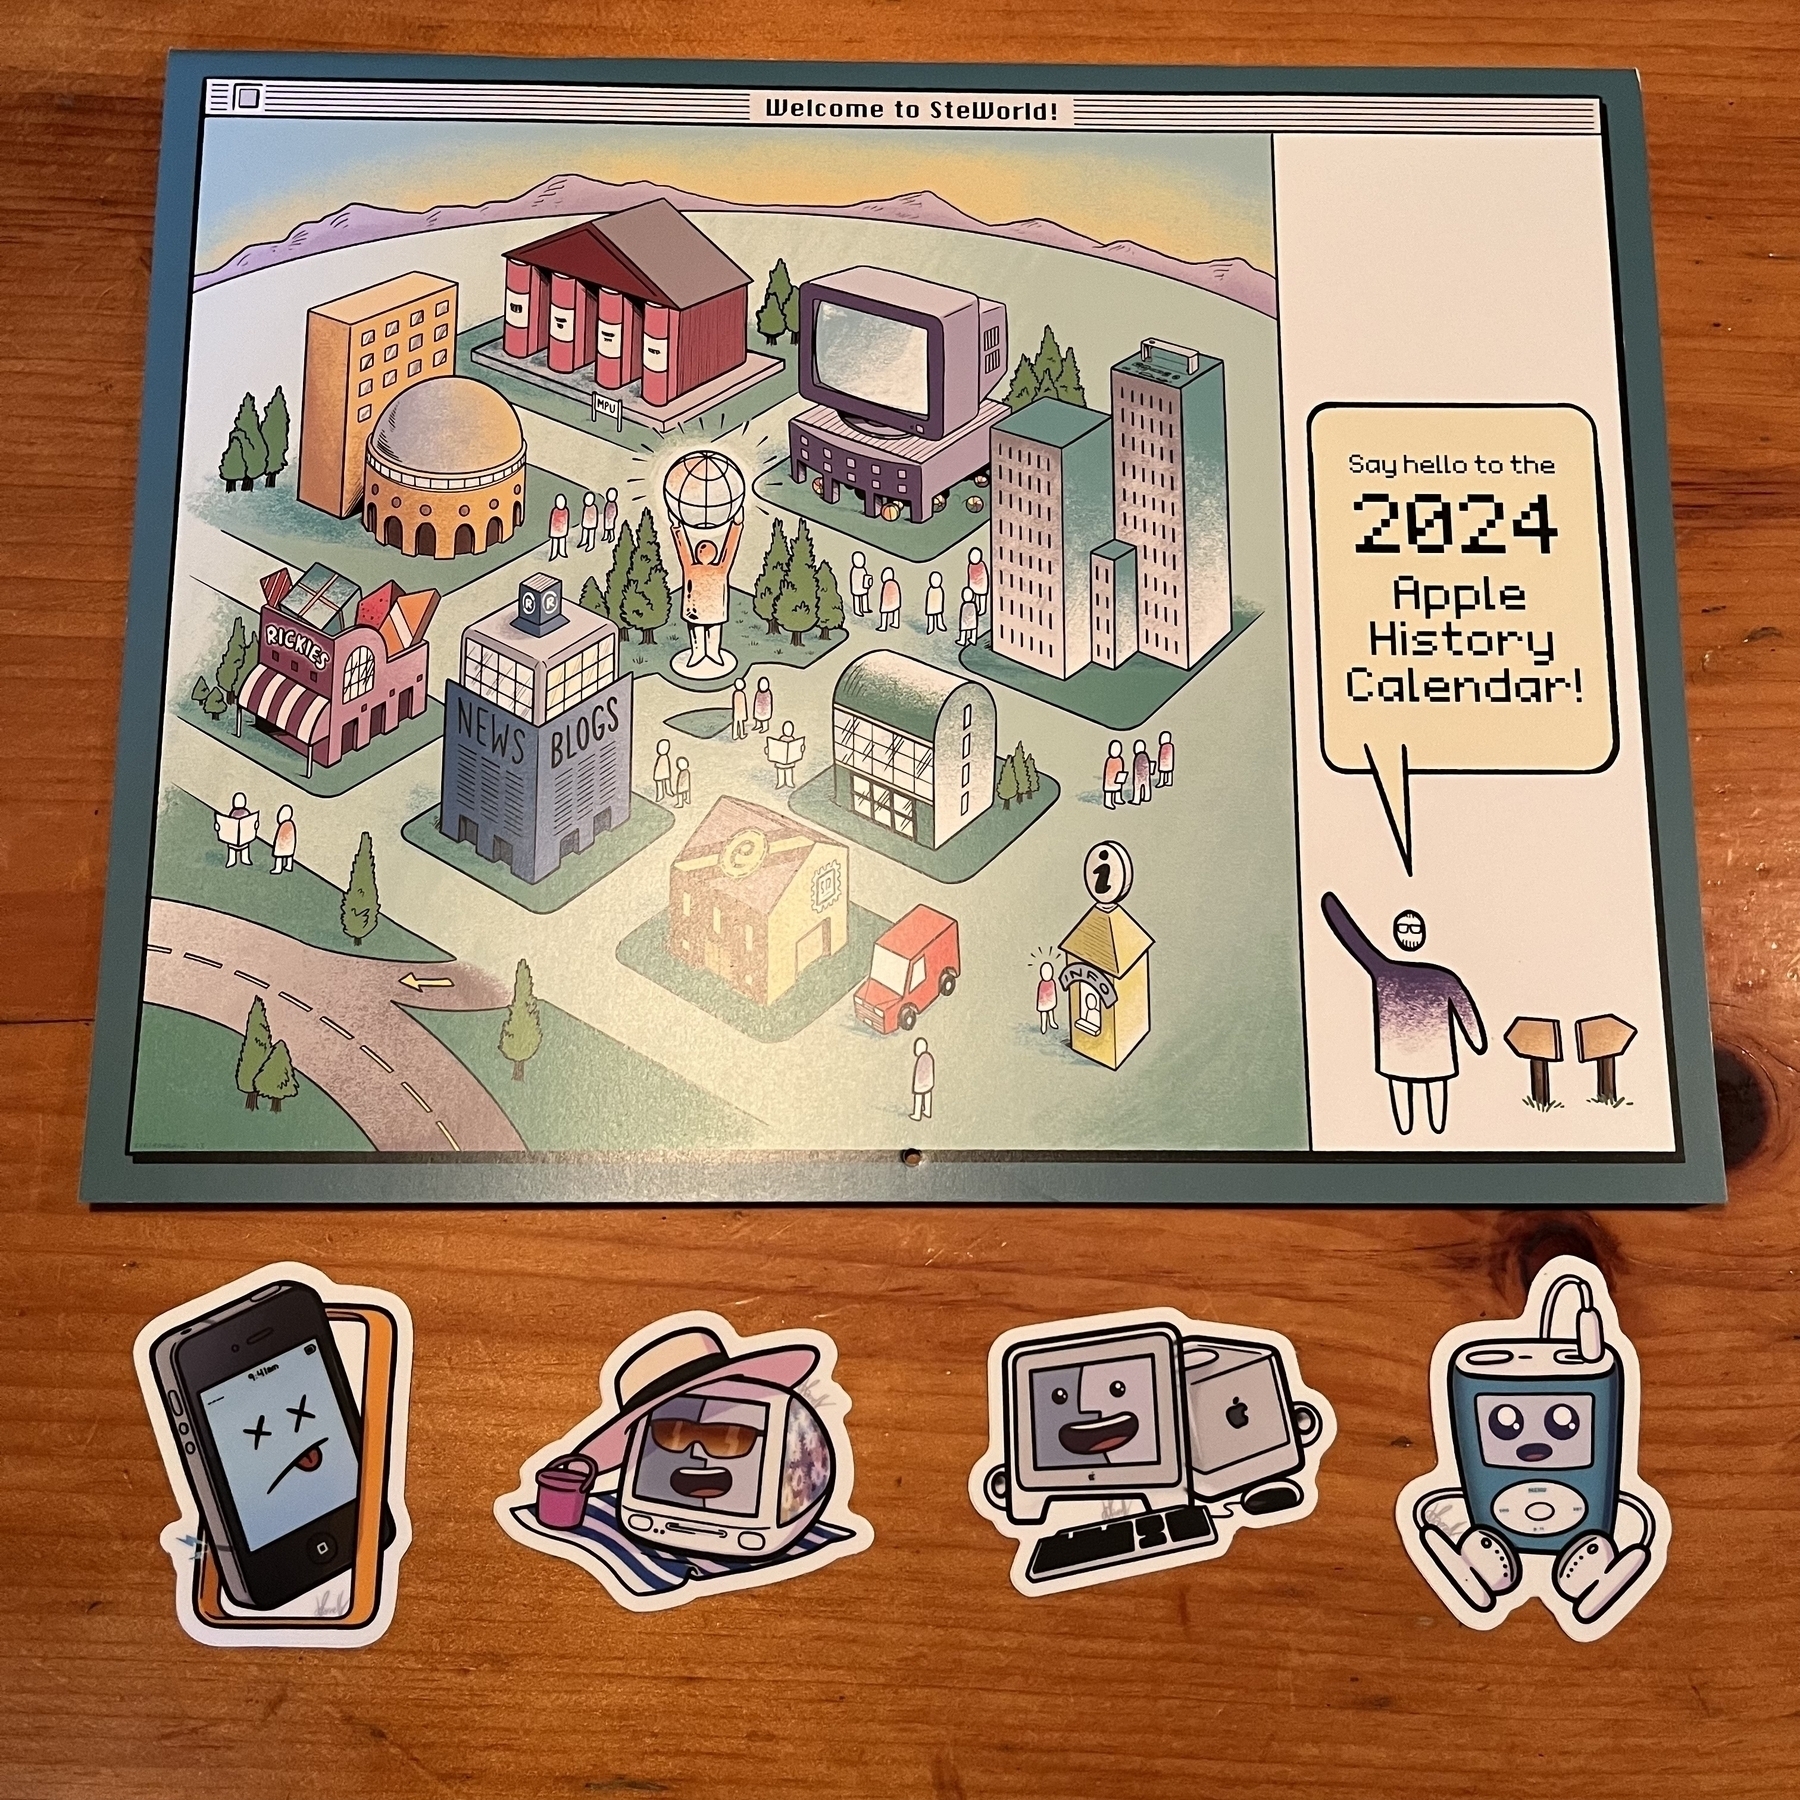 The cover of the 2024 Apple history calendar that shows the bird side view of a cartoon-like city, and four stickers themed around the iPhone, iMac, and iPod.